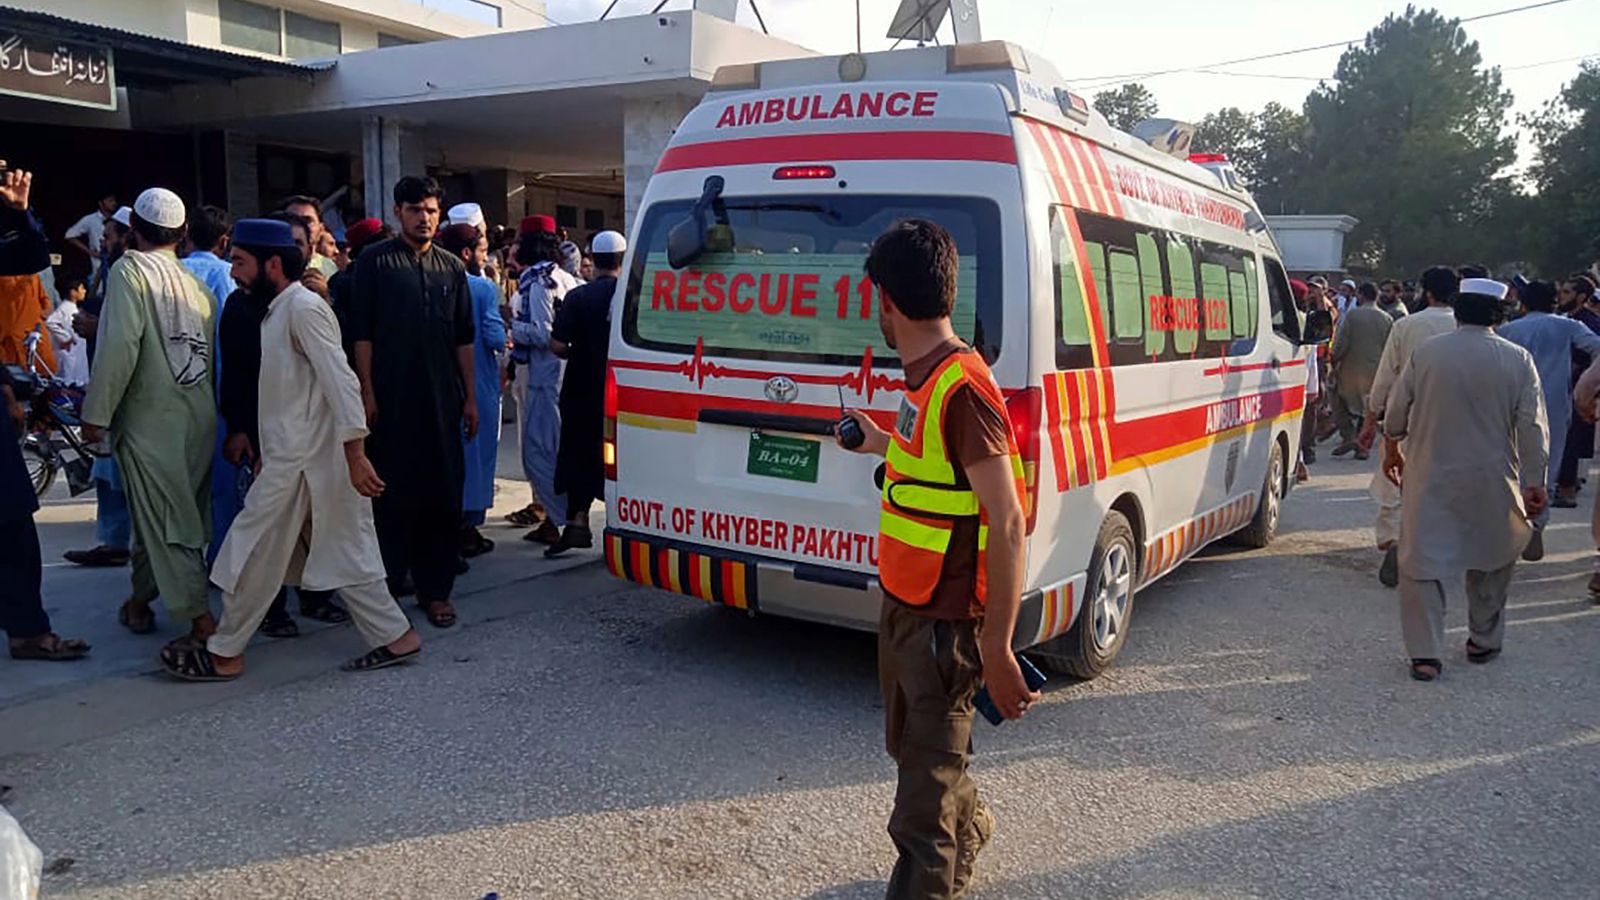 Pakistan explosion: At least 40 dead in blast at political rally in northwest province - reports